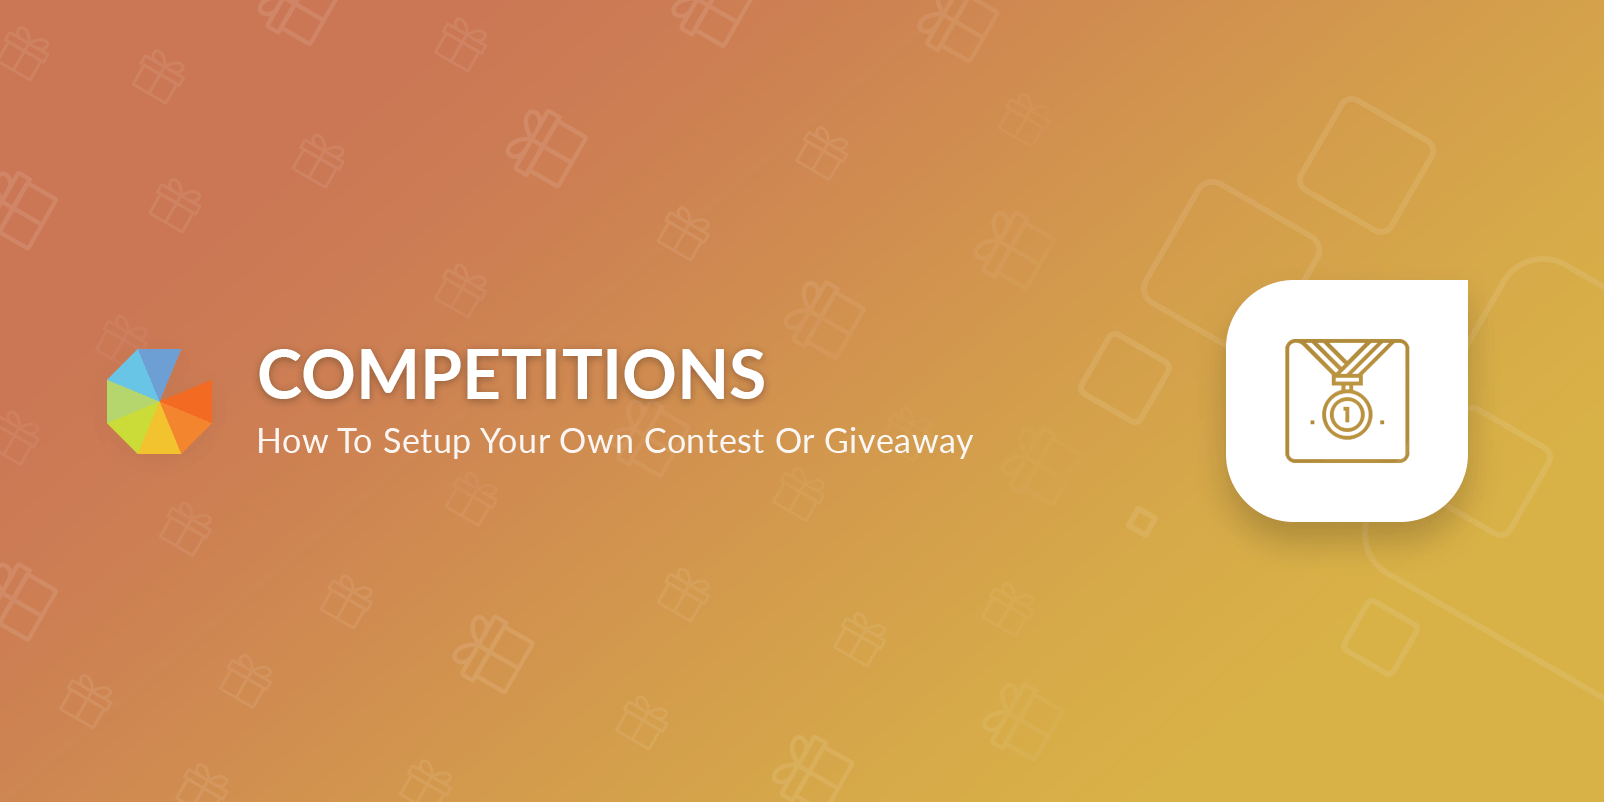 Competitions, how to setup your own contest of giveaway